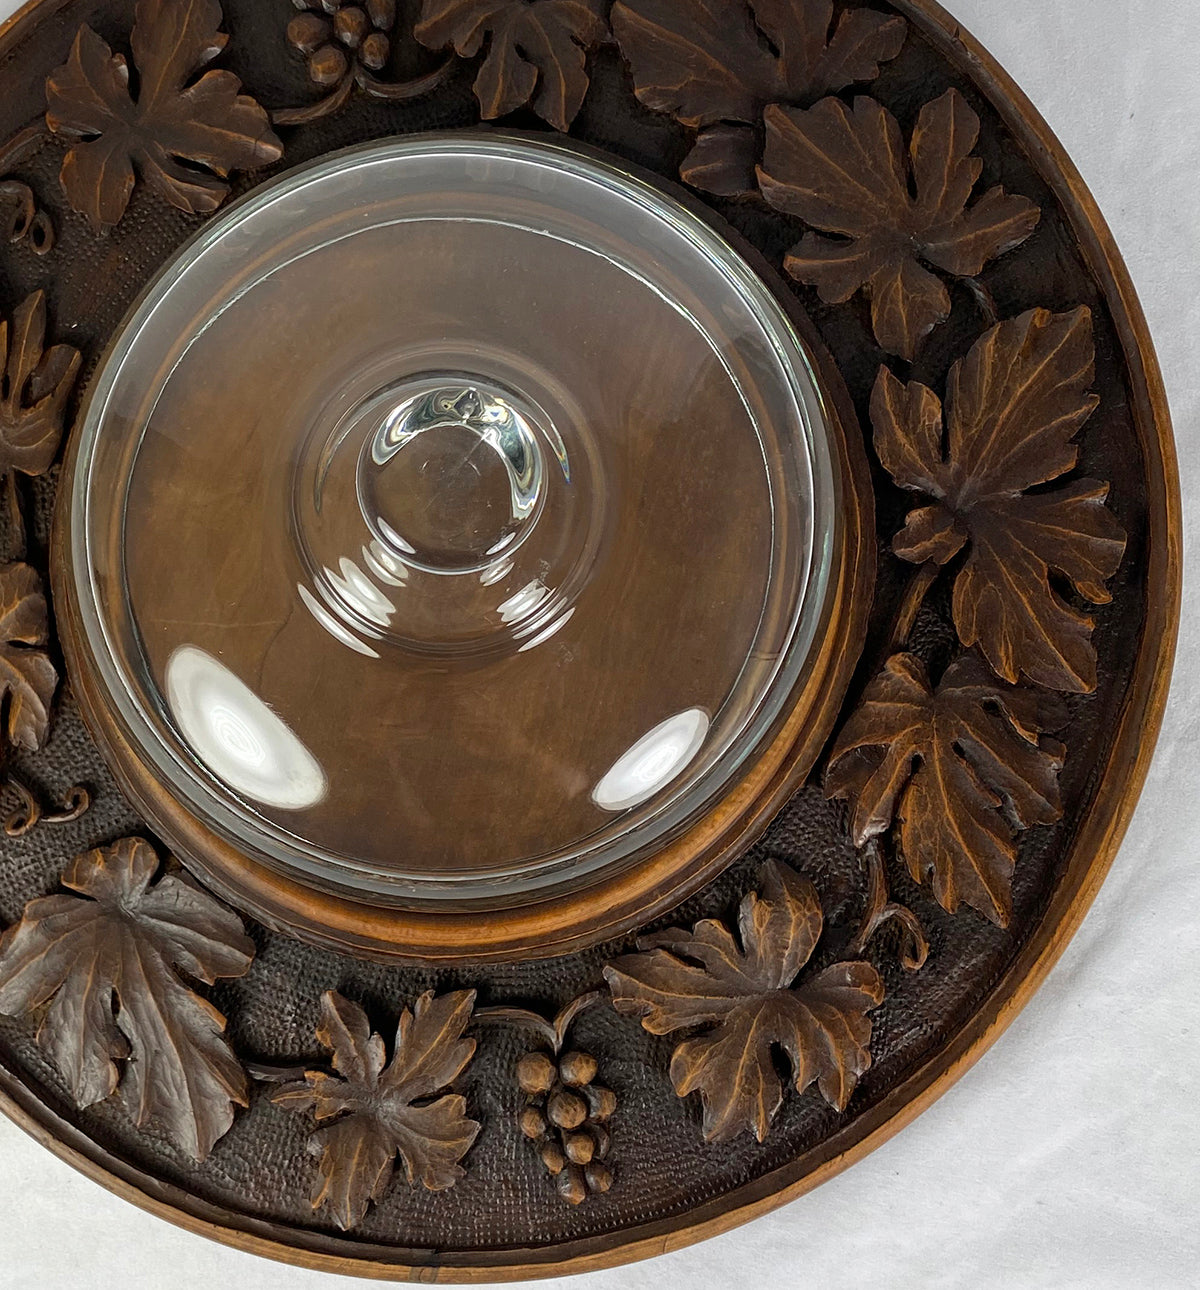 Antique Hand Carved Swiss Black Forest 13 1/4" Cheese Tray with Glass Dome c. 1918